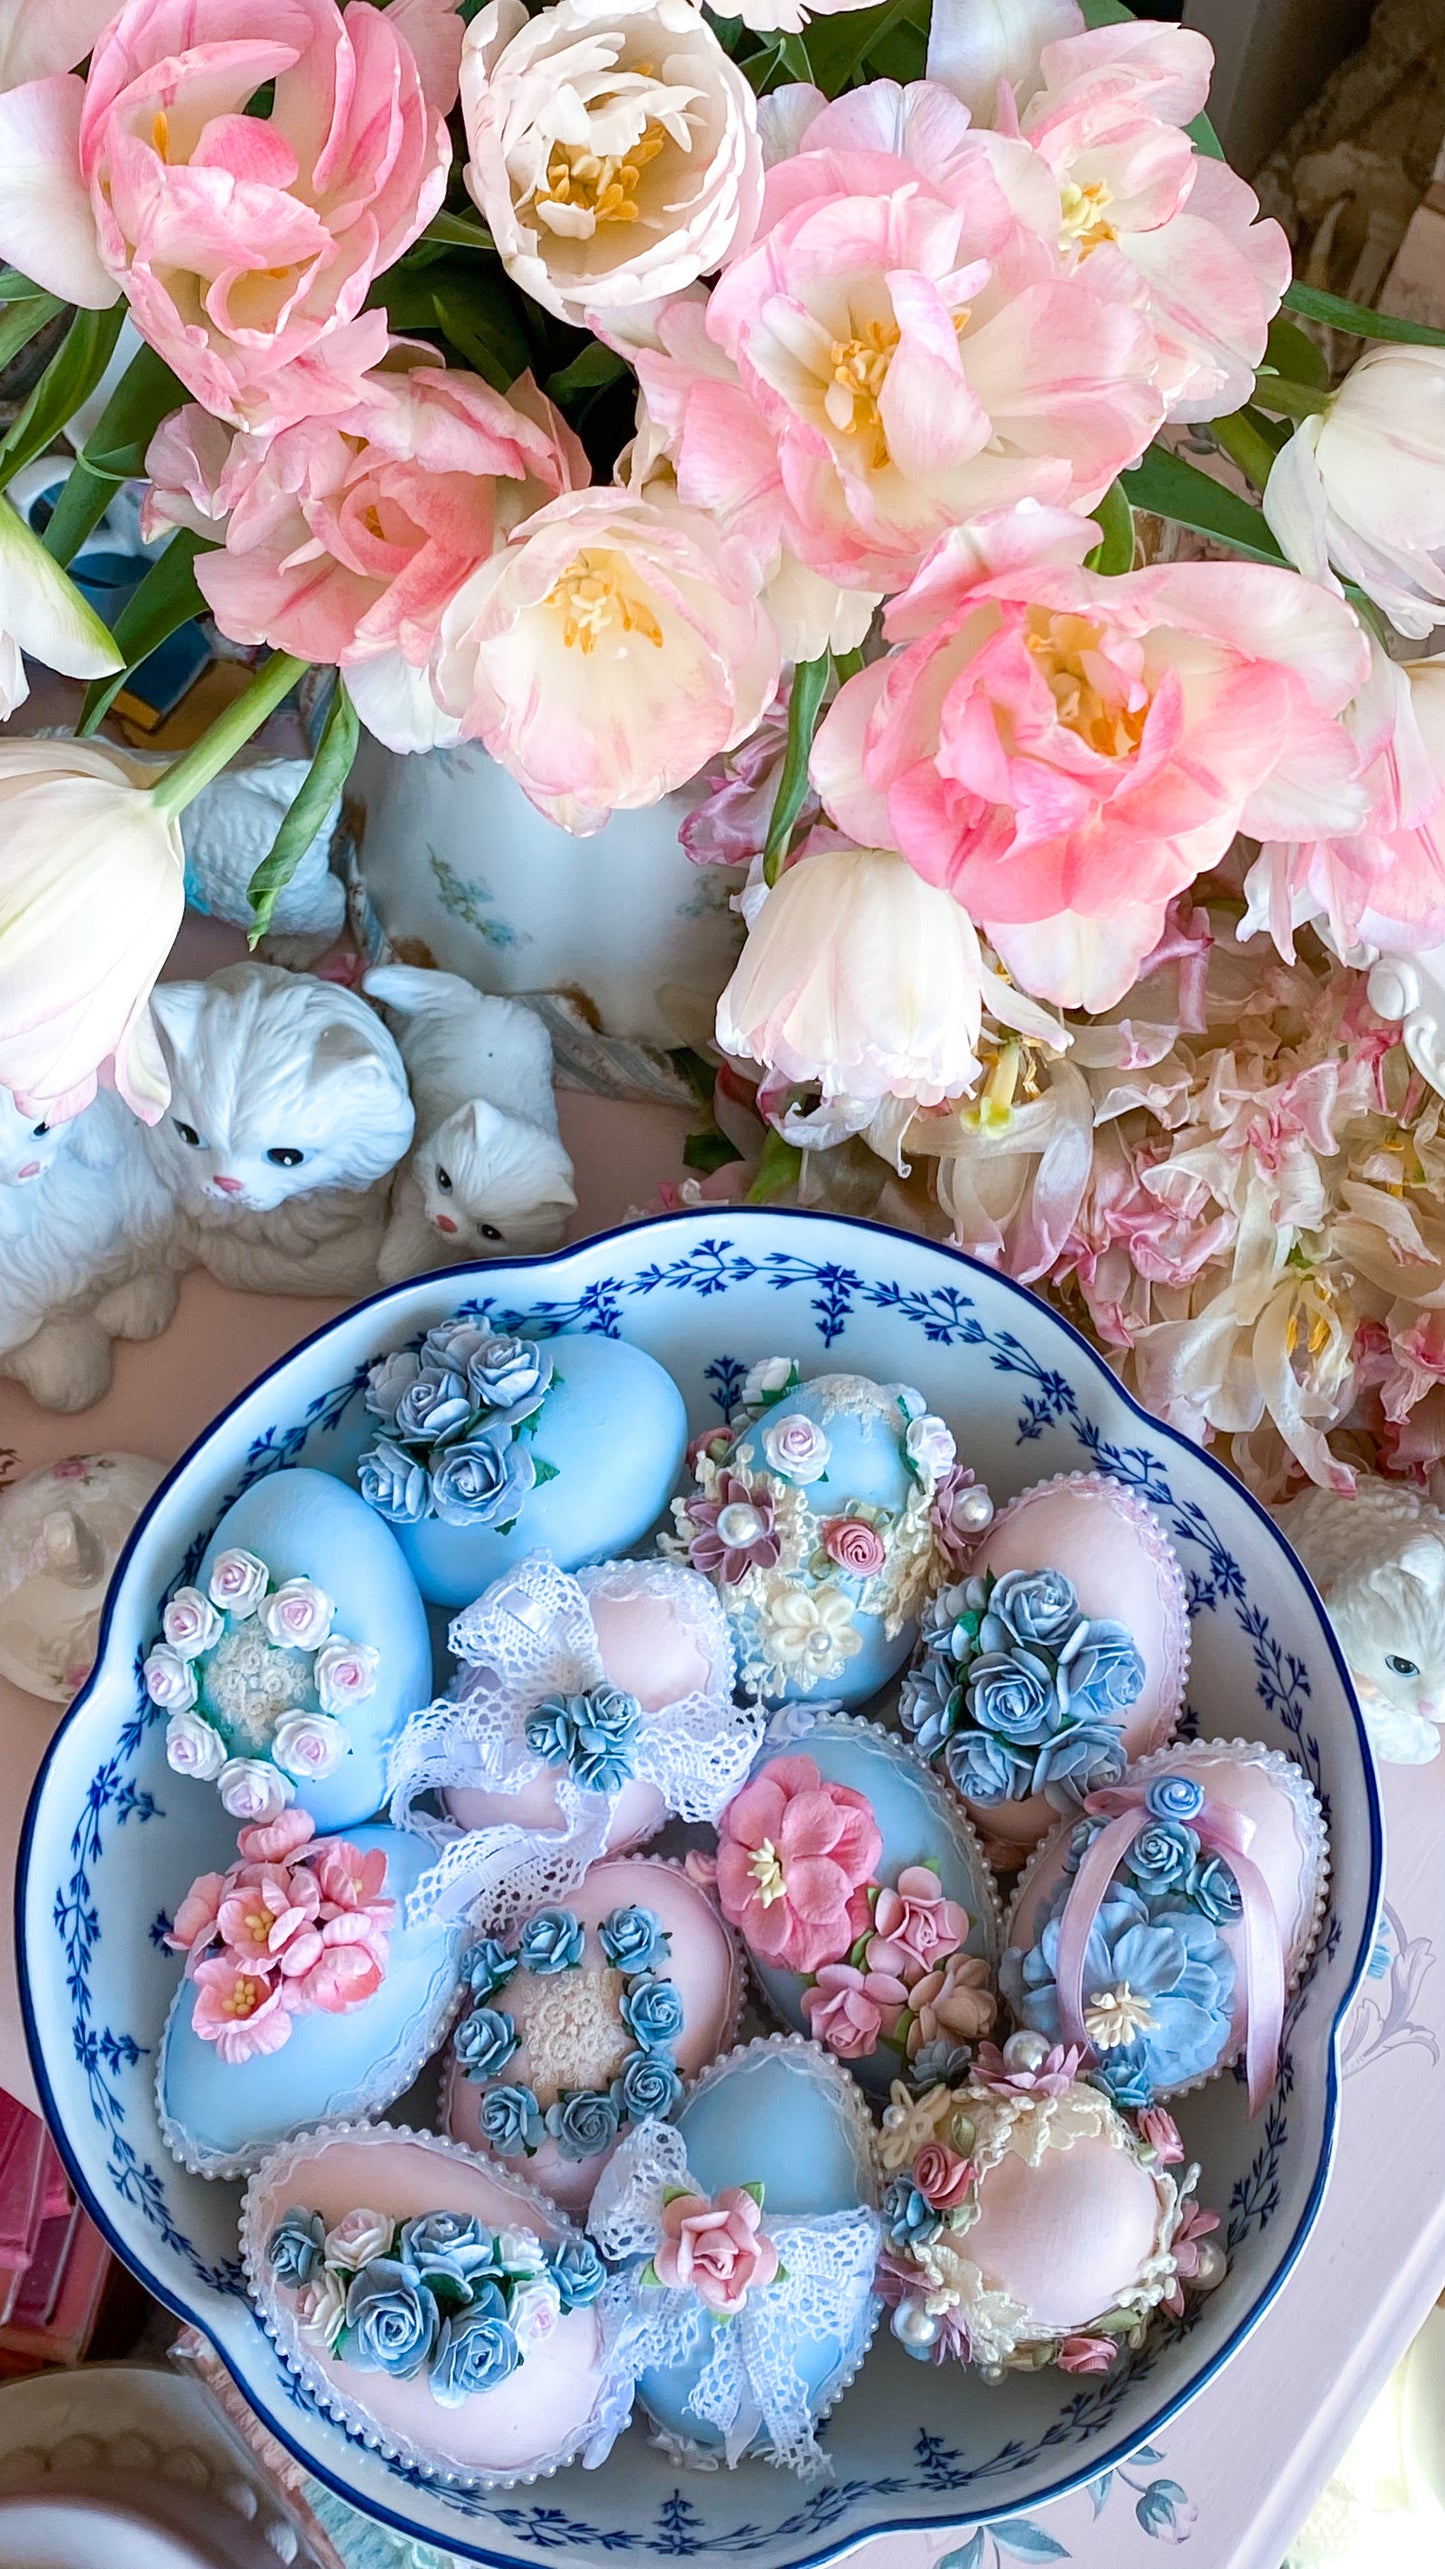 Set of 3 Bespoke Handmade Pastel Pink Shabby Chic Egg Bowl Sitters with Blue Flowers